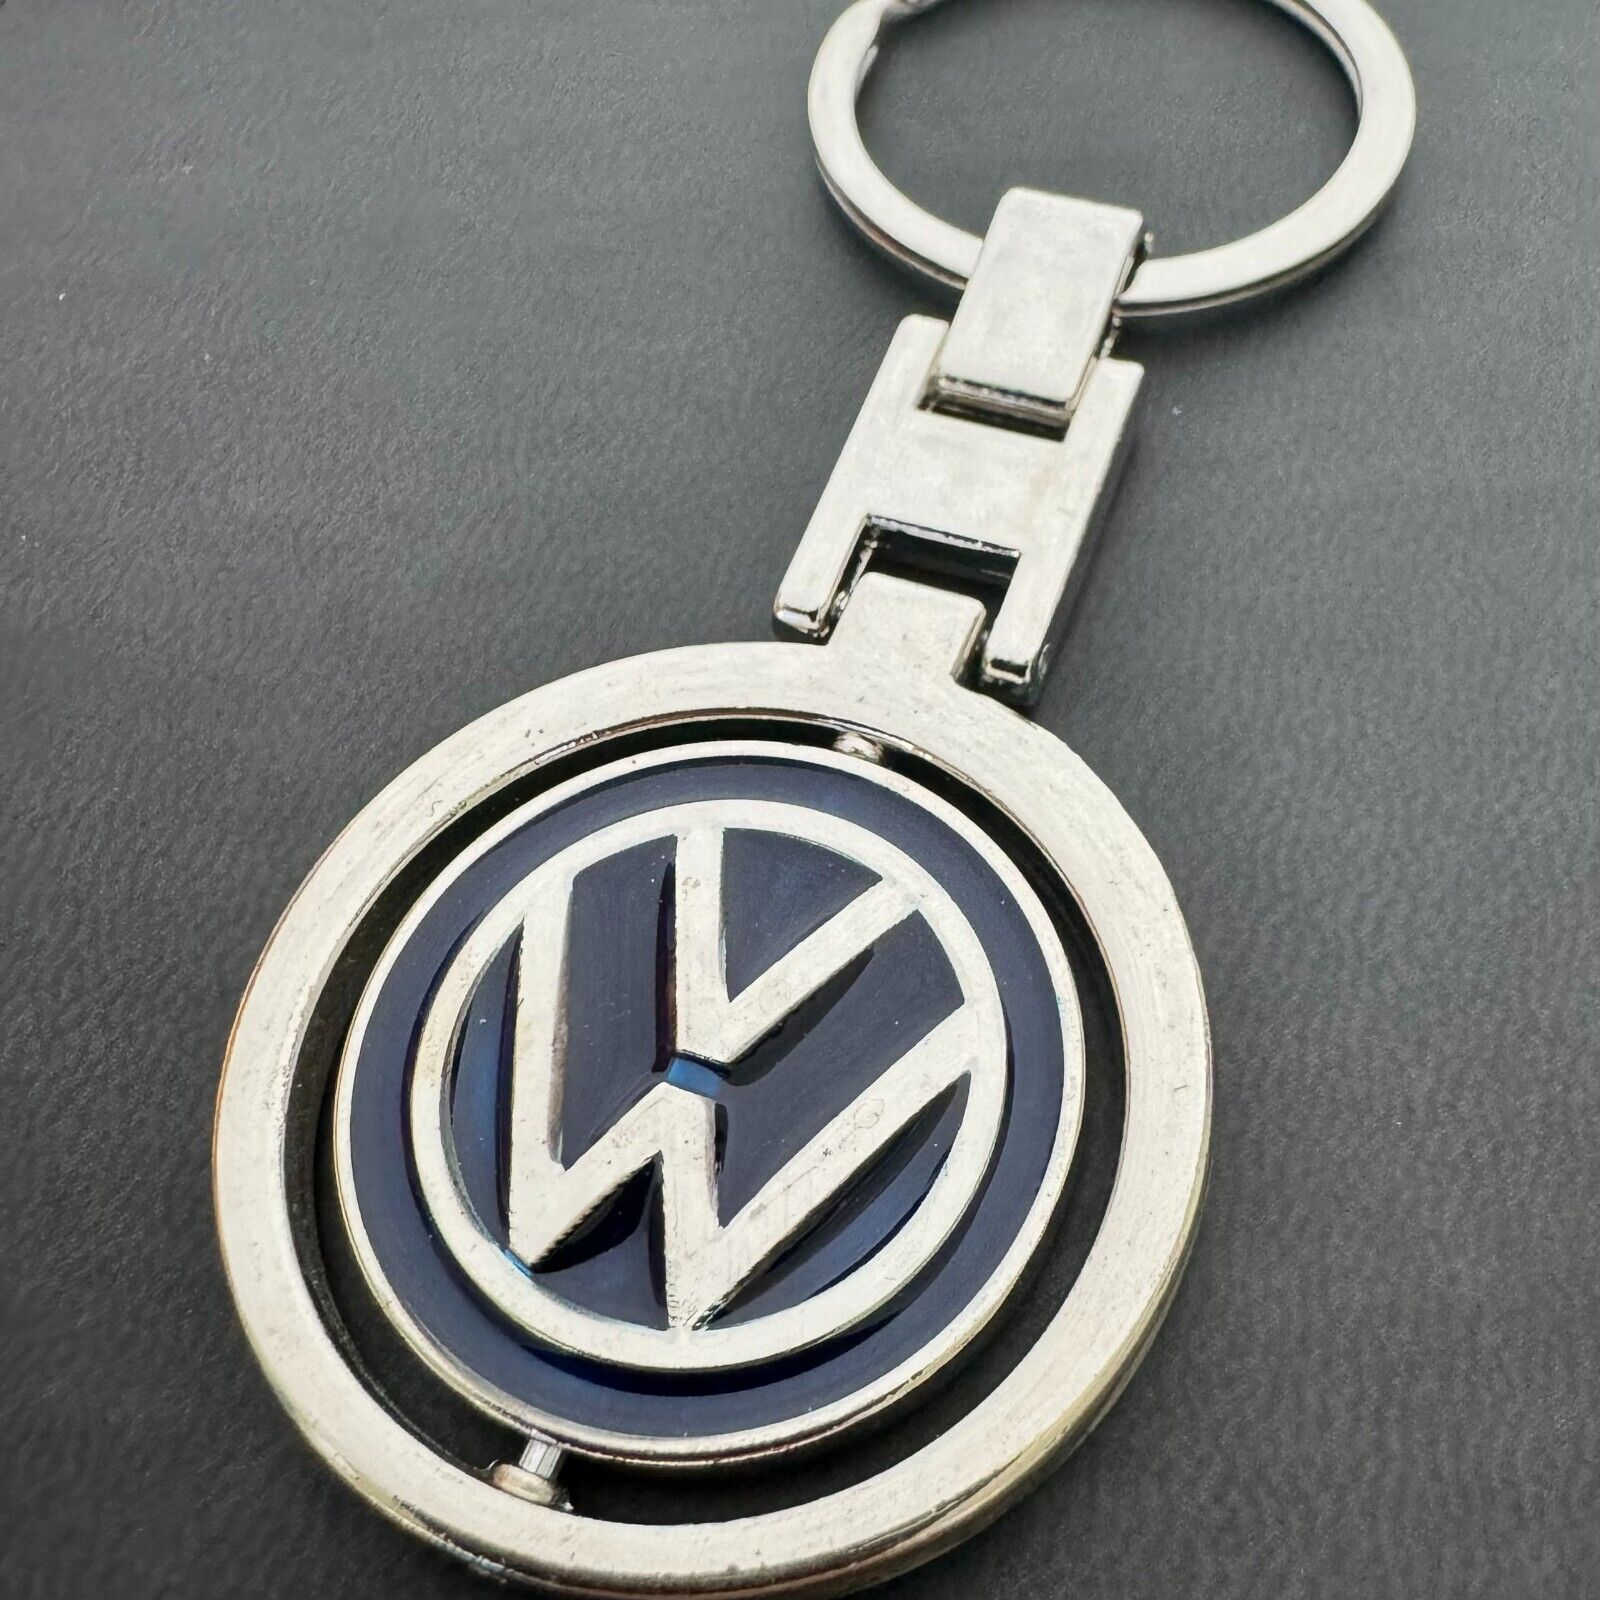 VW Volkswagen Keychain - Logo Rotates on an Axis Unique Design BLUE